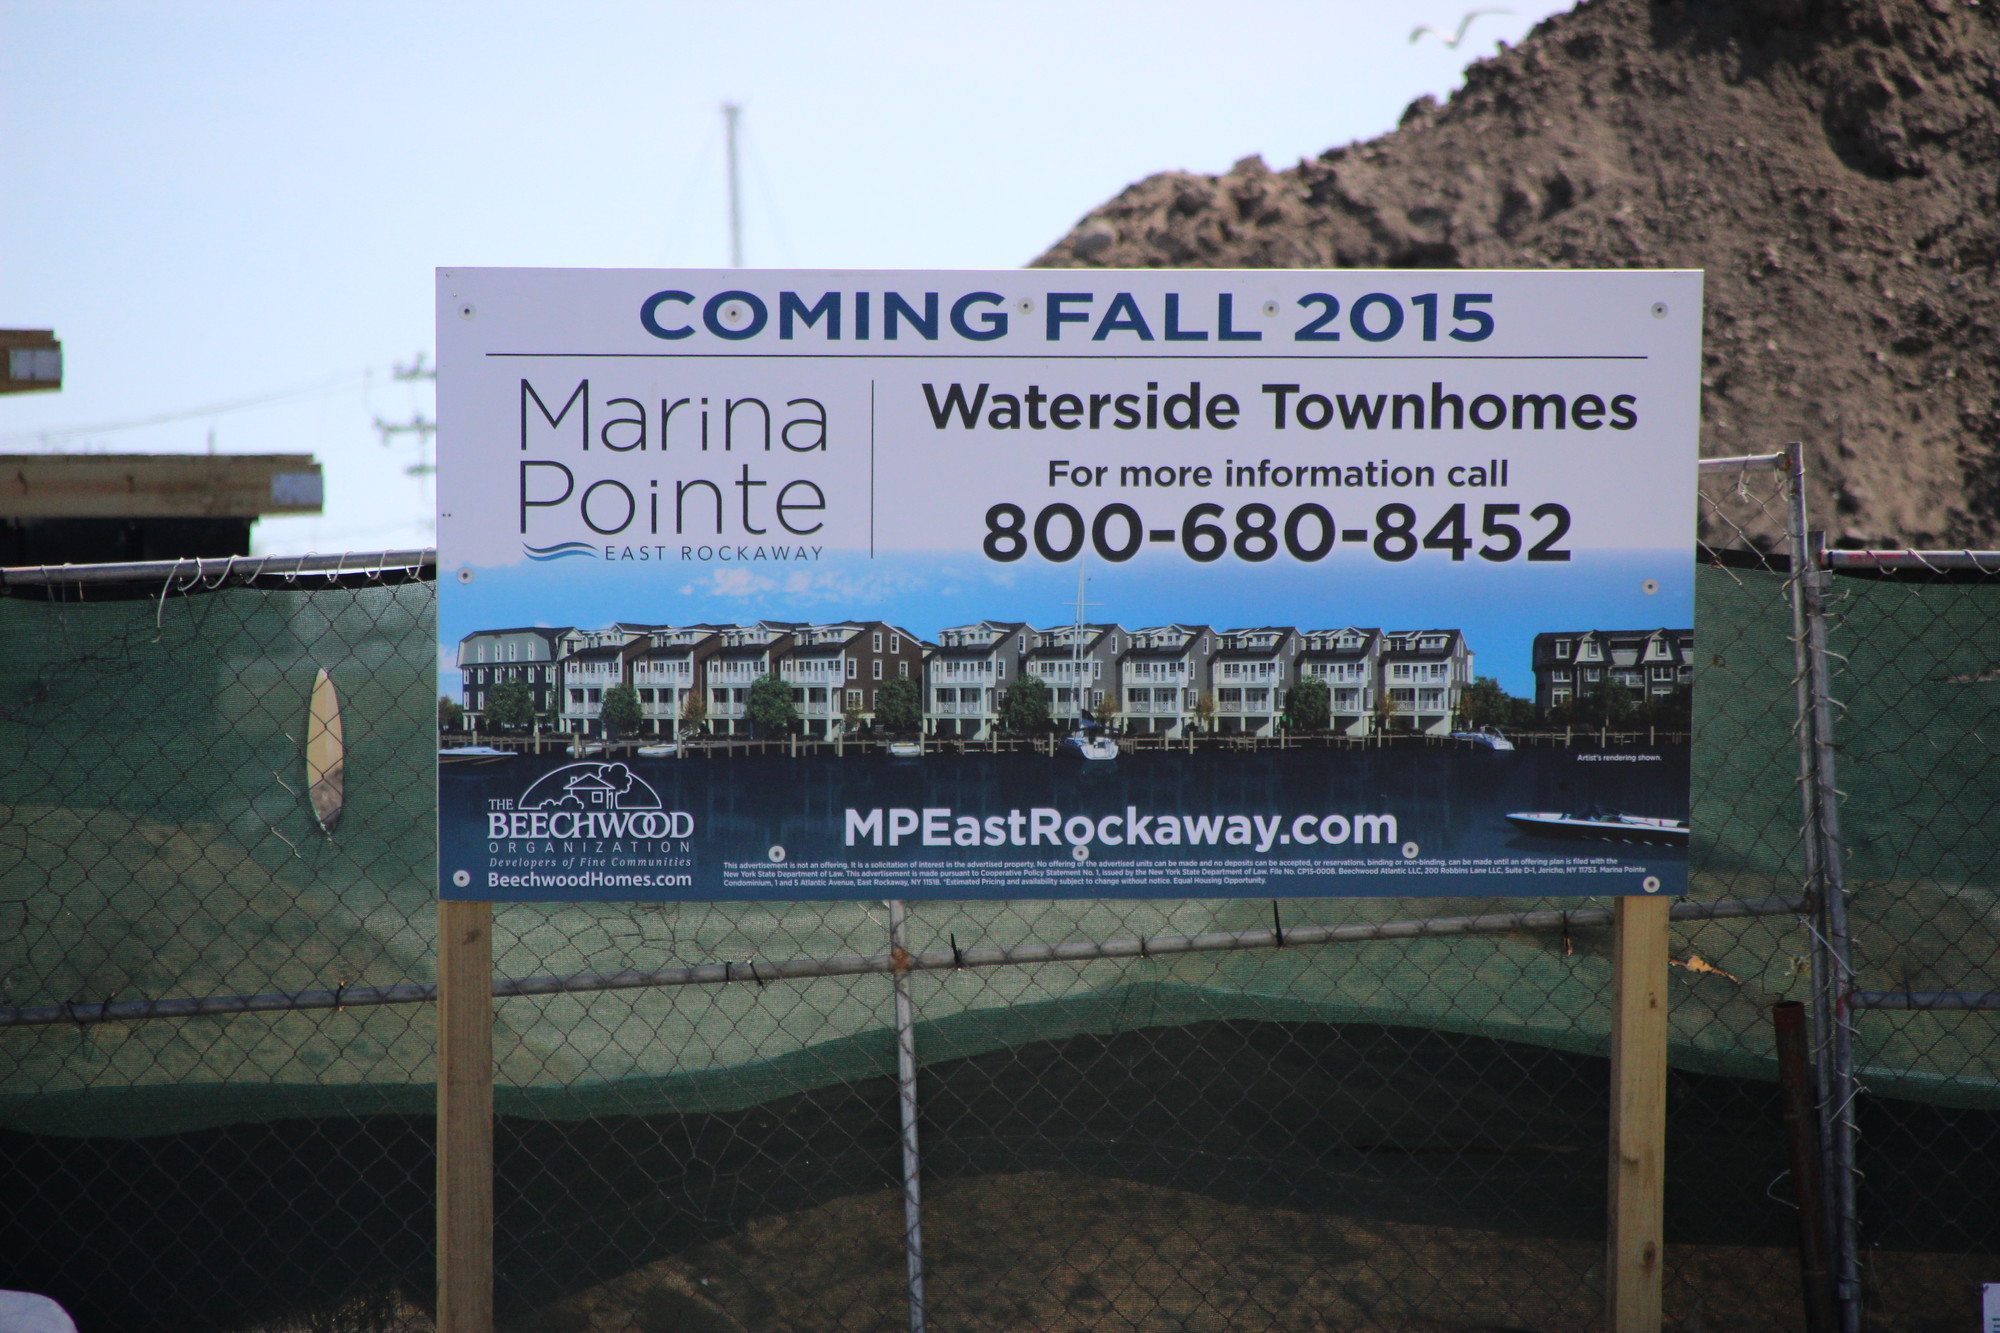 The grading of the site is being raised to make the development storm resilient. (the sign should read ‘2016.’)